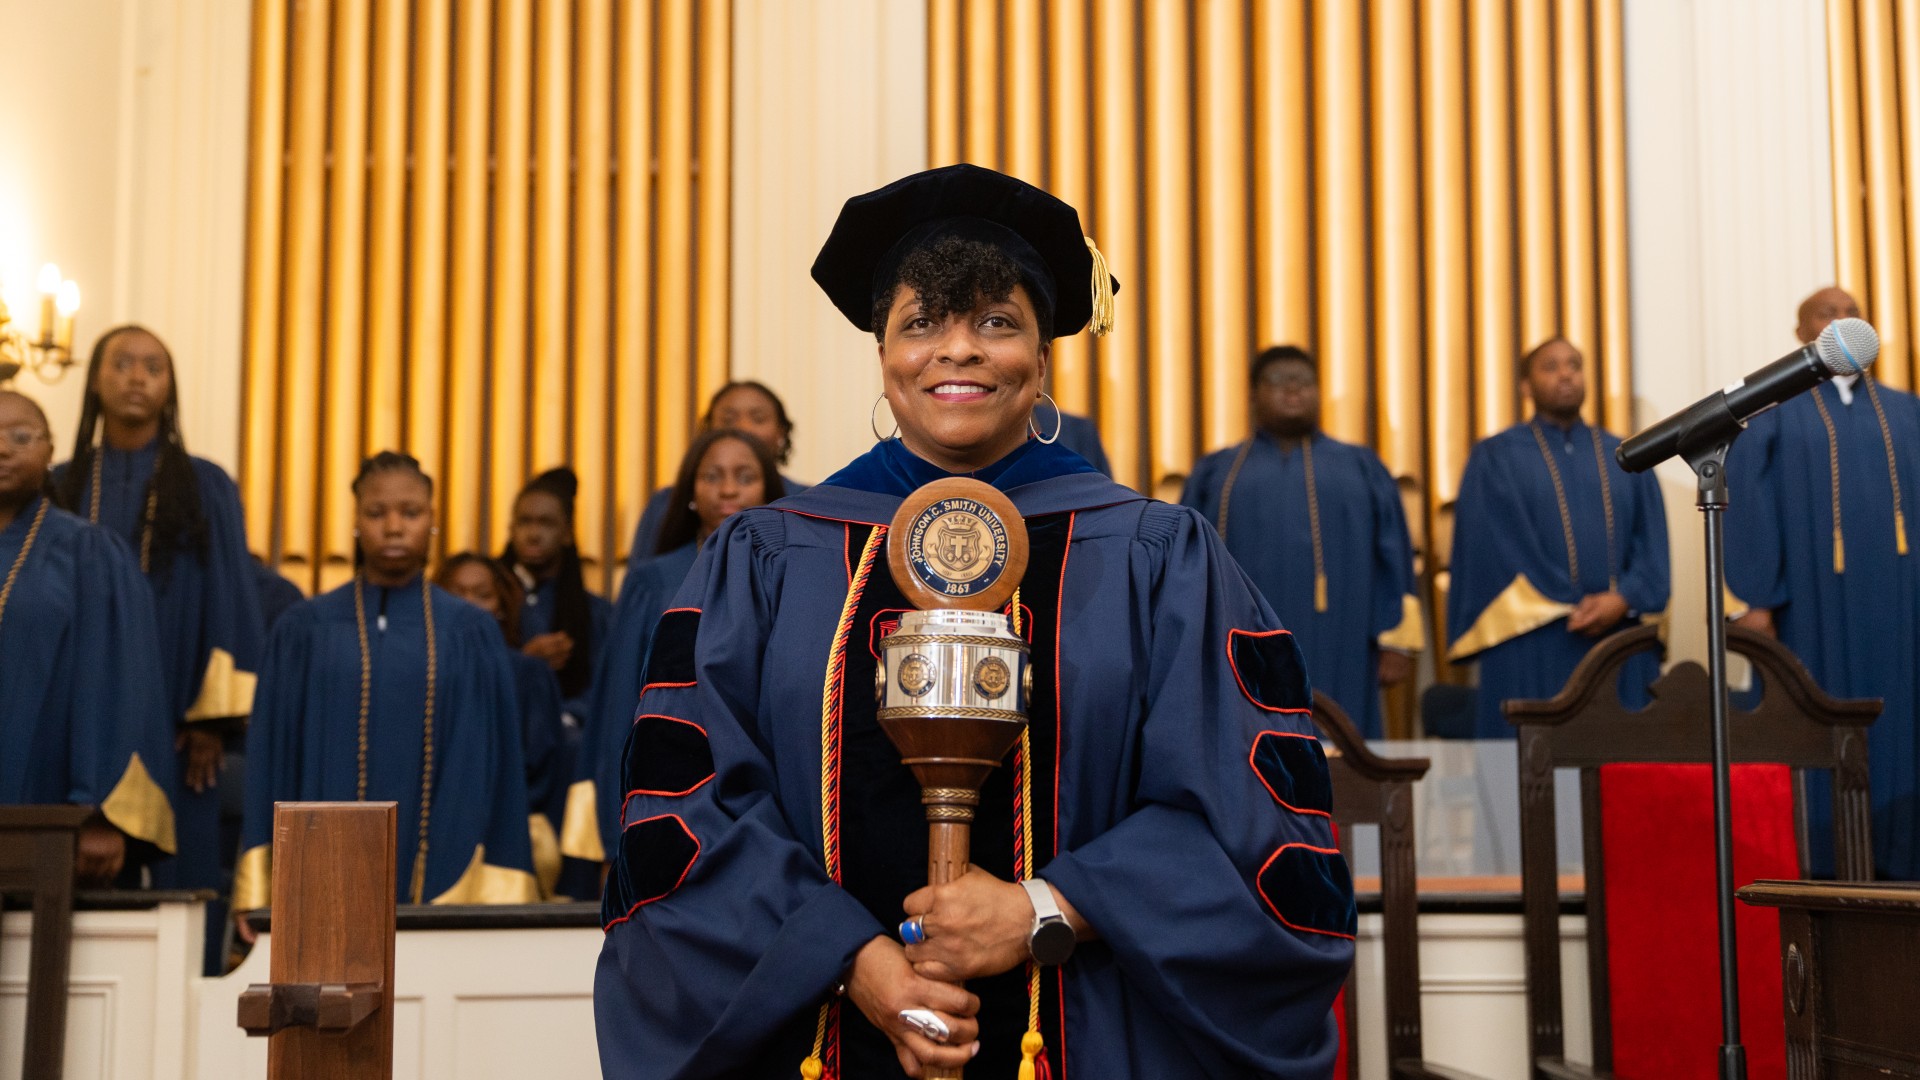 Dr. Karen D. Morgan, senior vice president for Academic Affairs, led the procession into the church